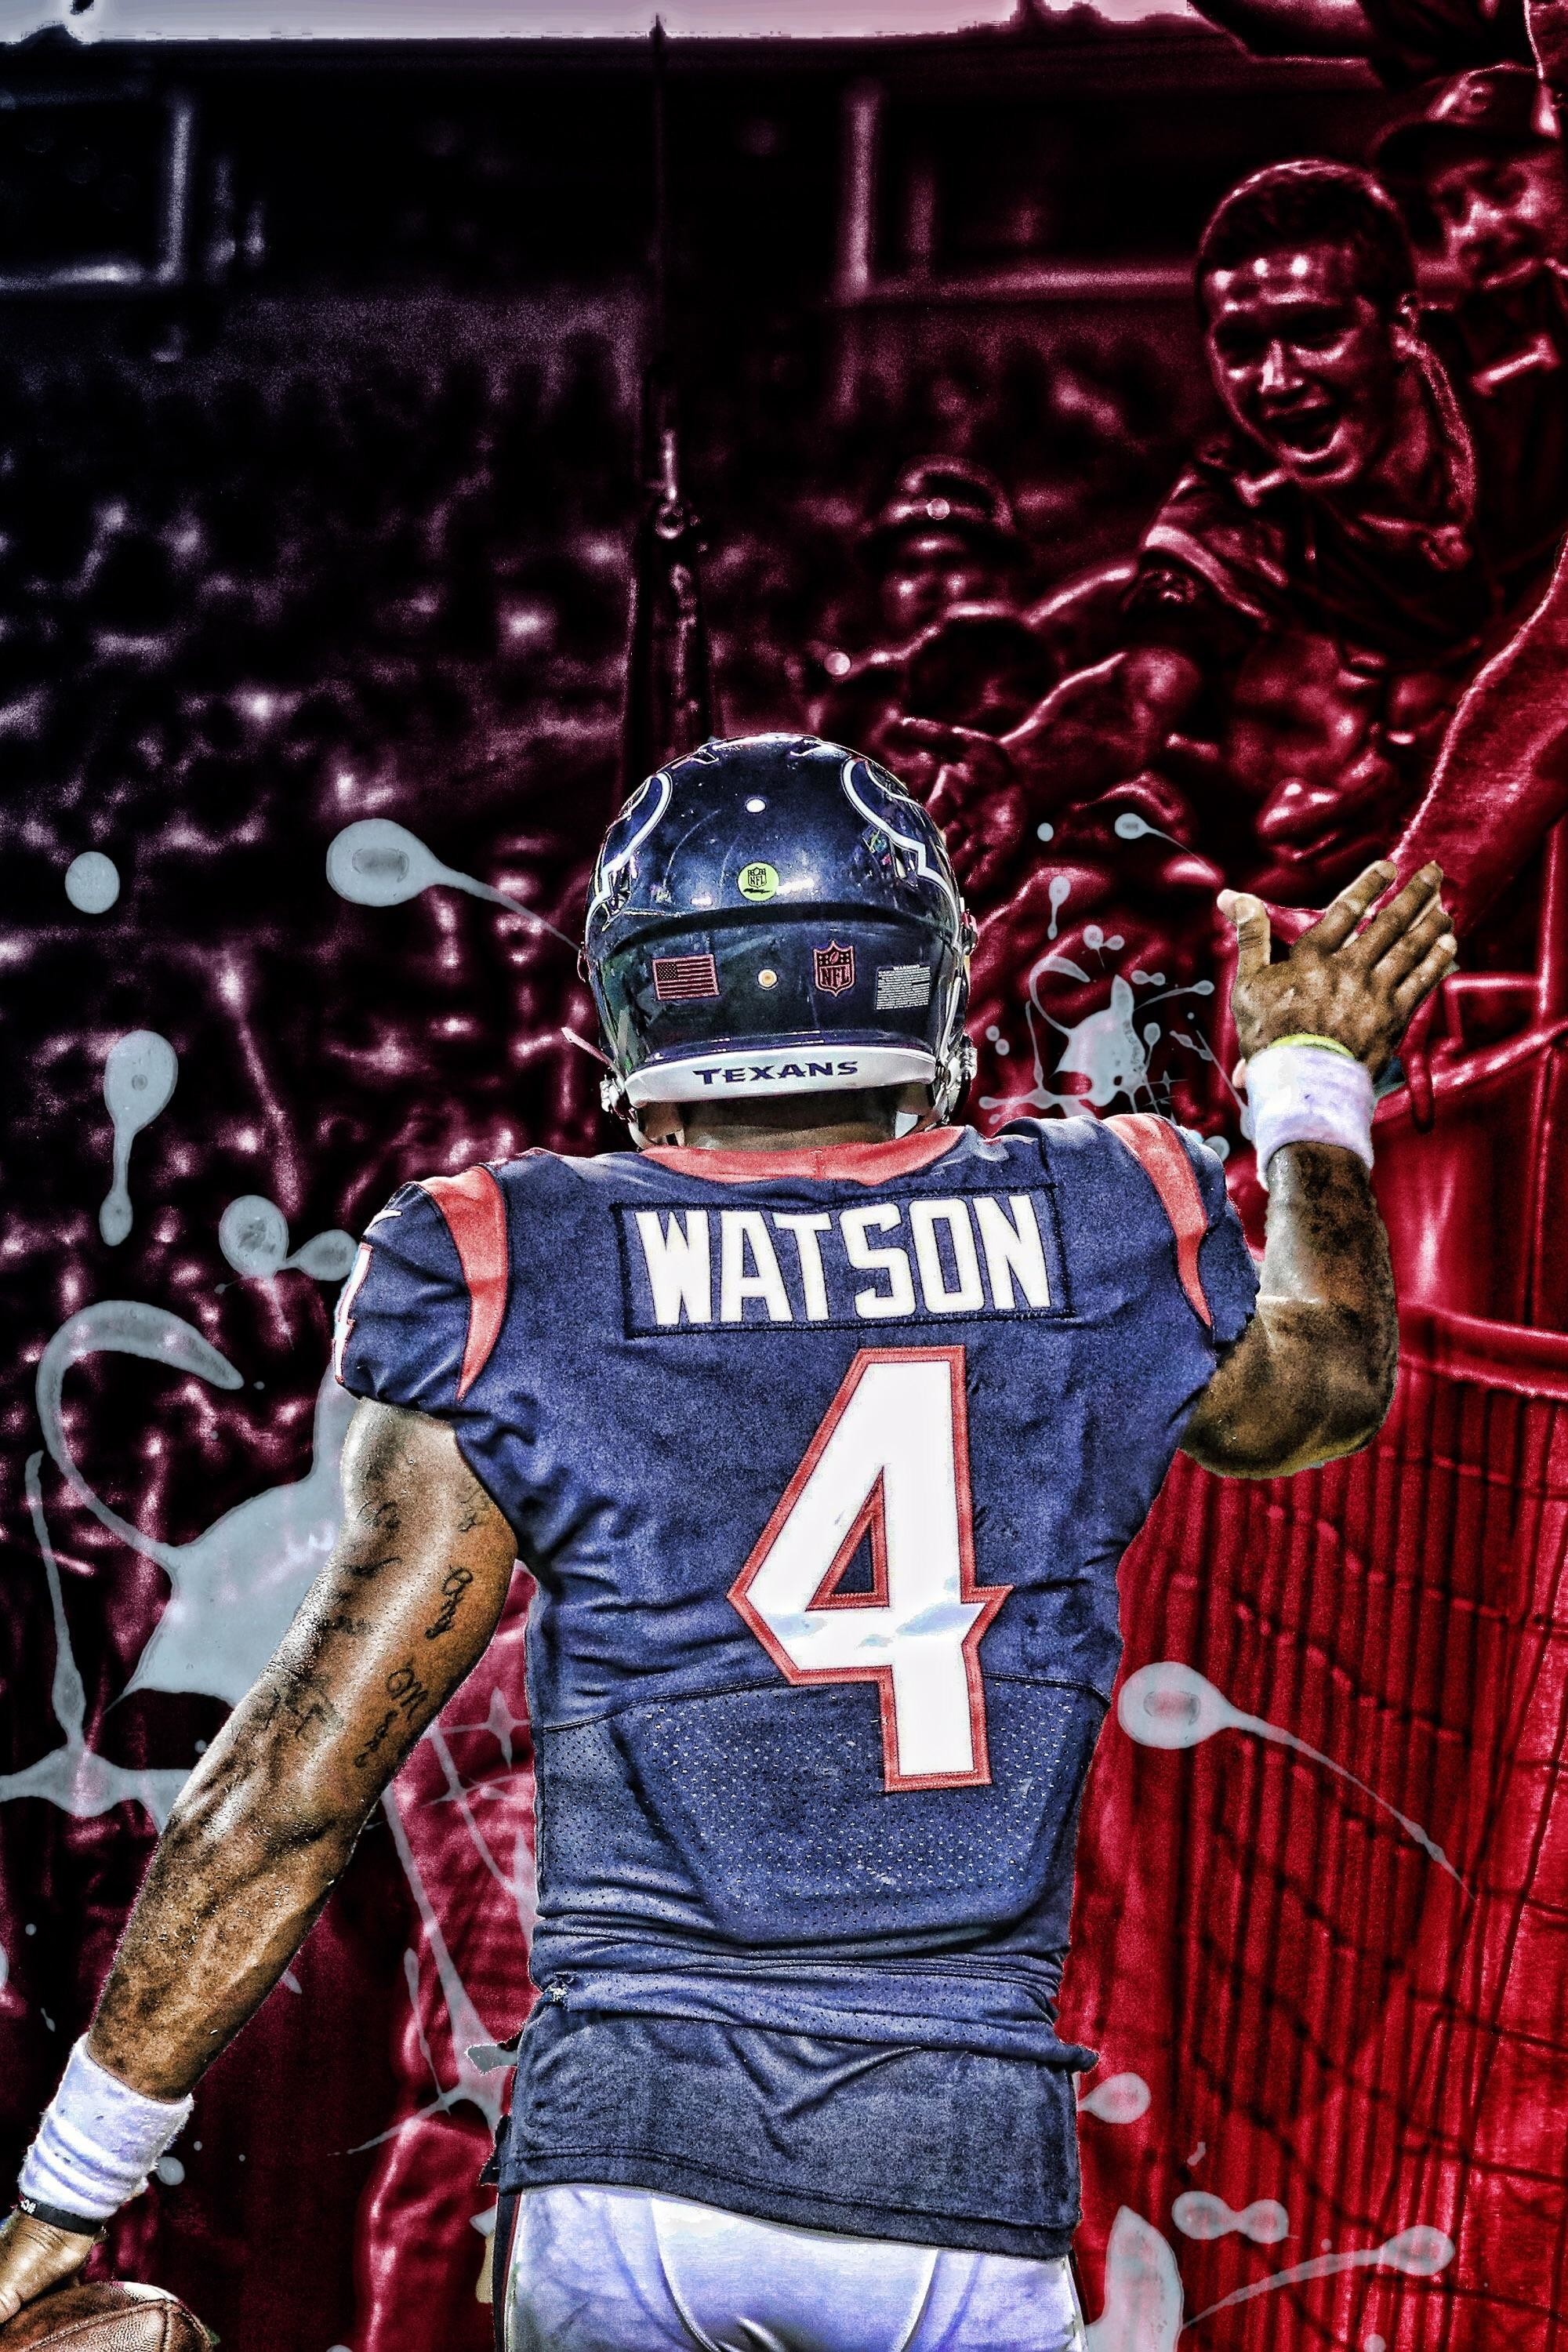 2000x3000 Our Lord and Savior (Great Phone Wallpaper) Â· HOUSTON TEXANS 1920x1200